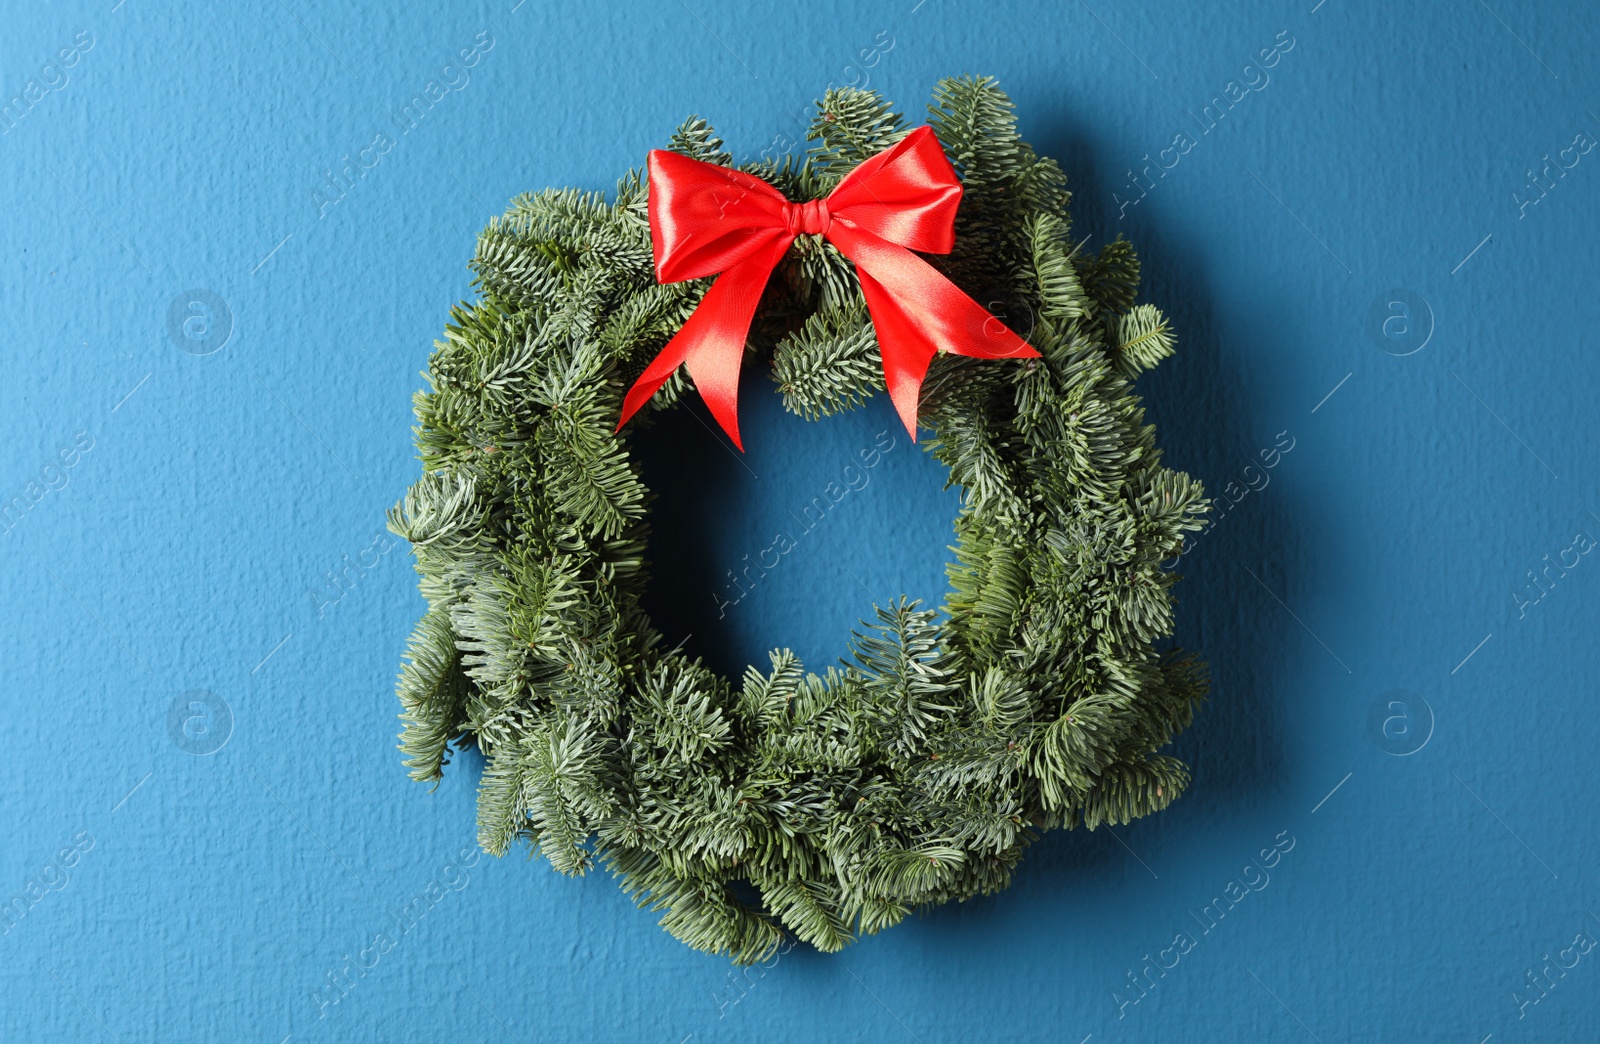 Photo of Christmas wreath made of fir tree branches with red ribbon on blue background